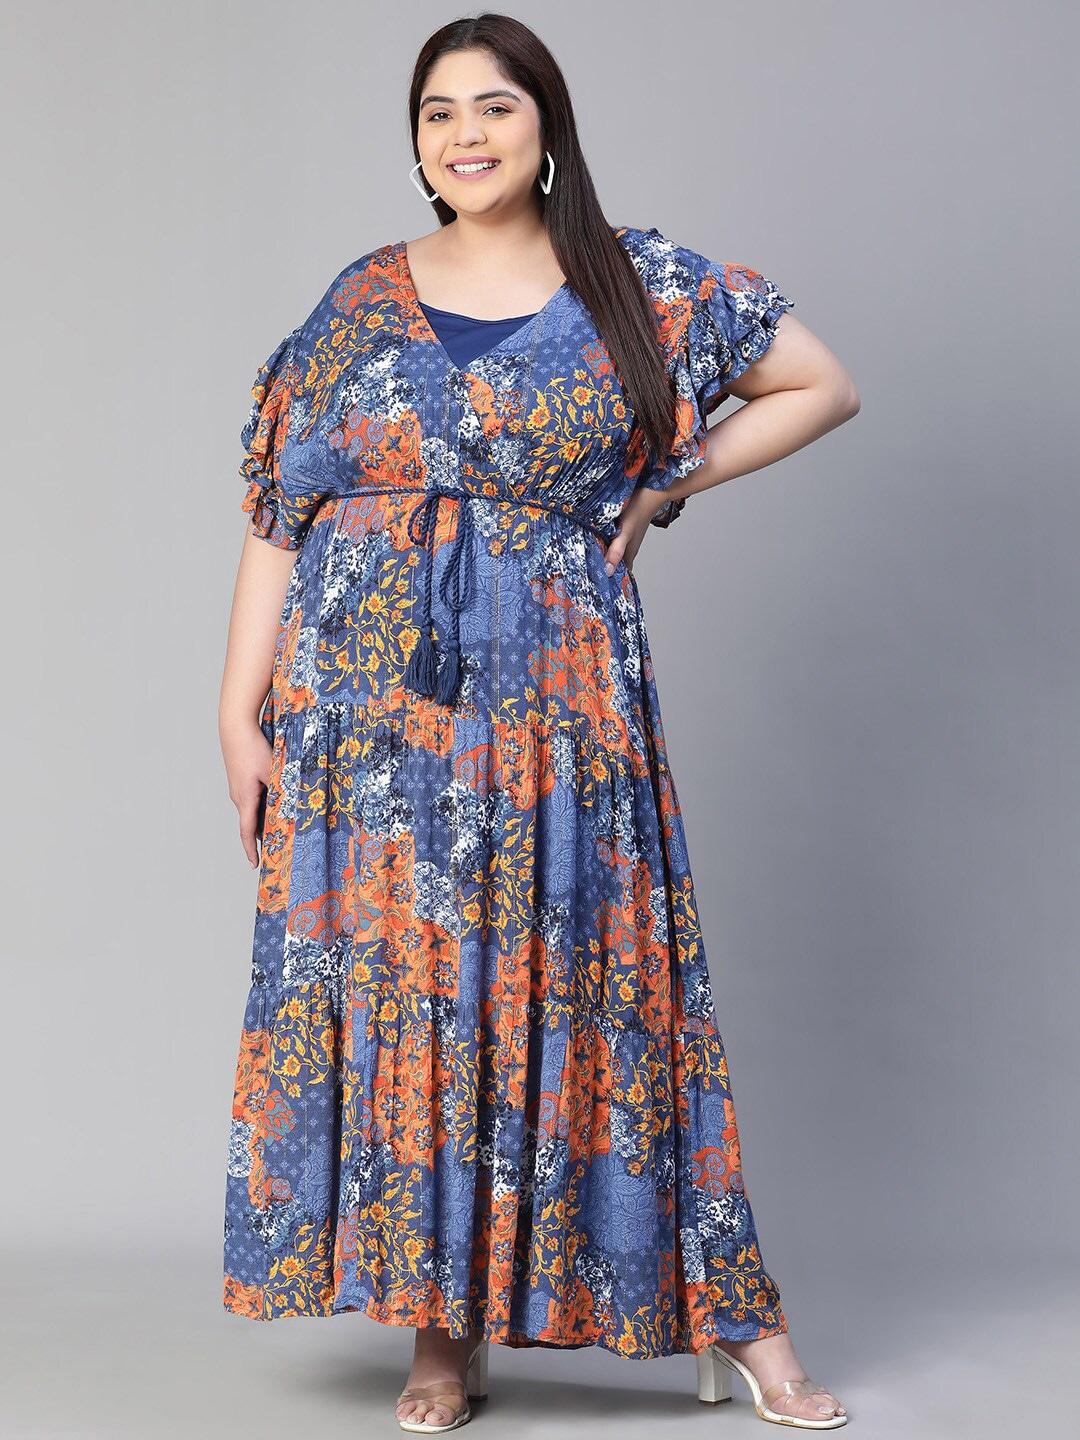 oxolloxo-plus-size-floral-printed-flutter-sleeves-tie-up-detail-crepe-maxi-dress